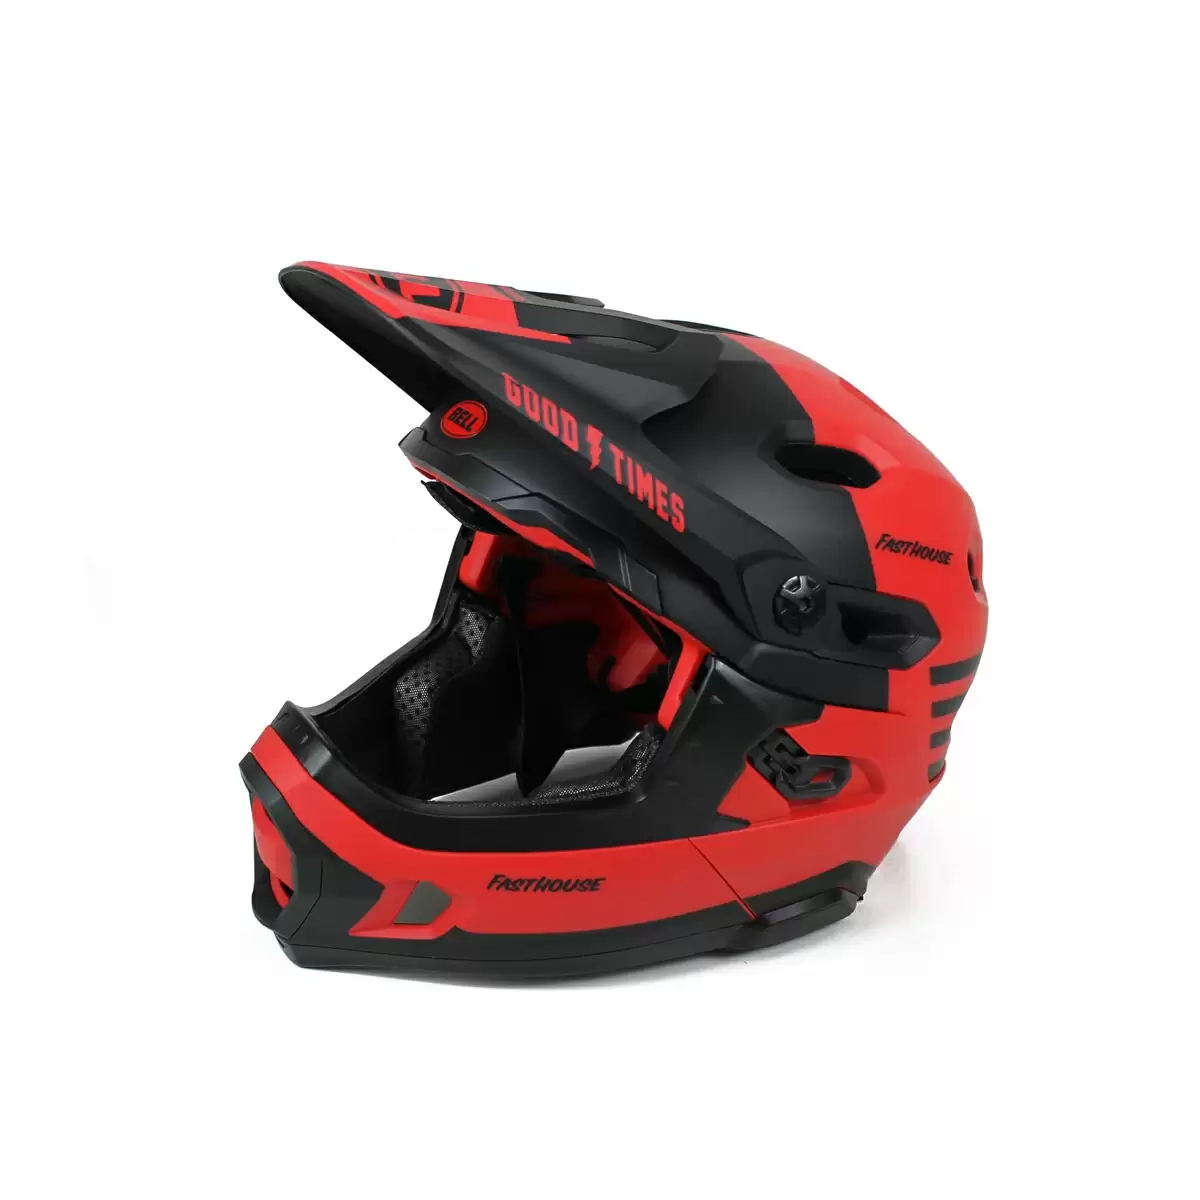 Helm Super DH MIPS Fasthouse Rot Größe S (52-56cm) #1